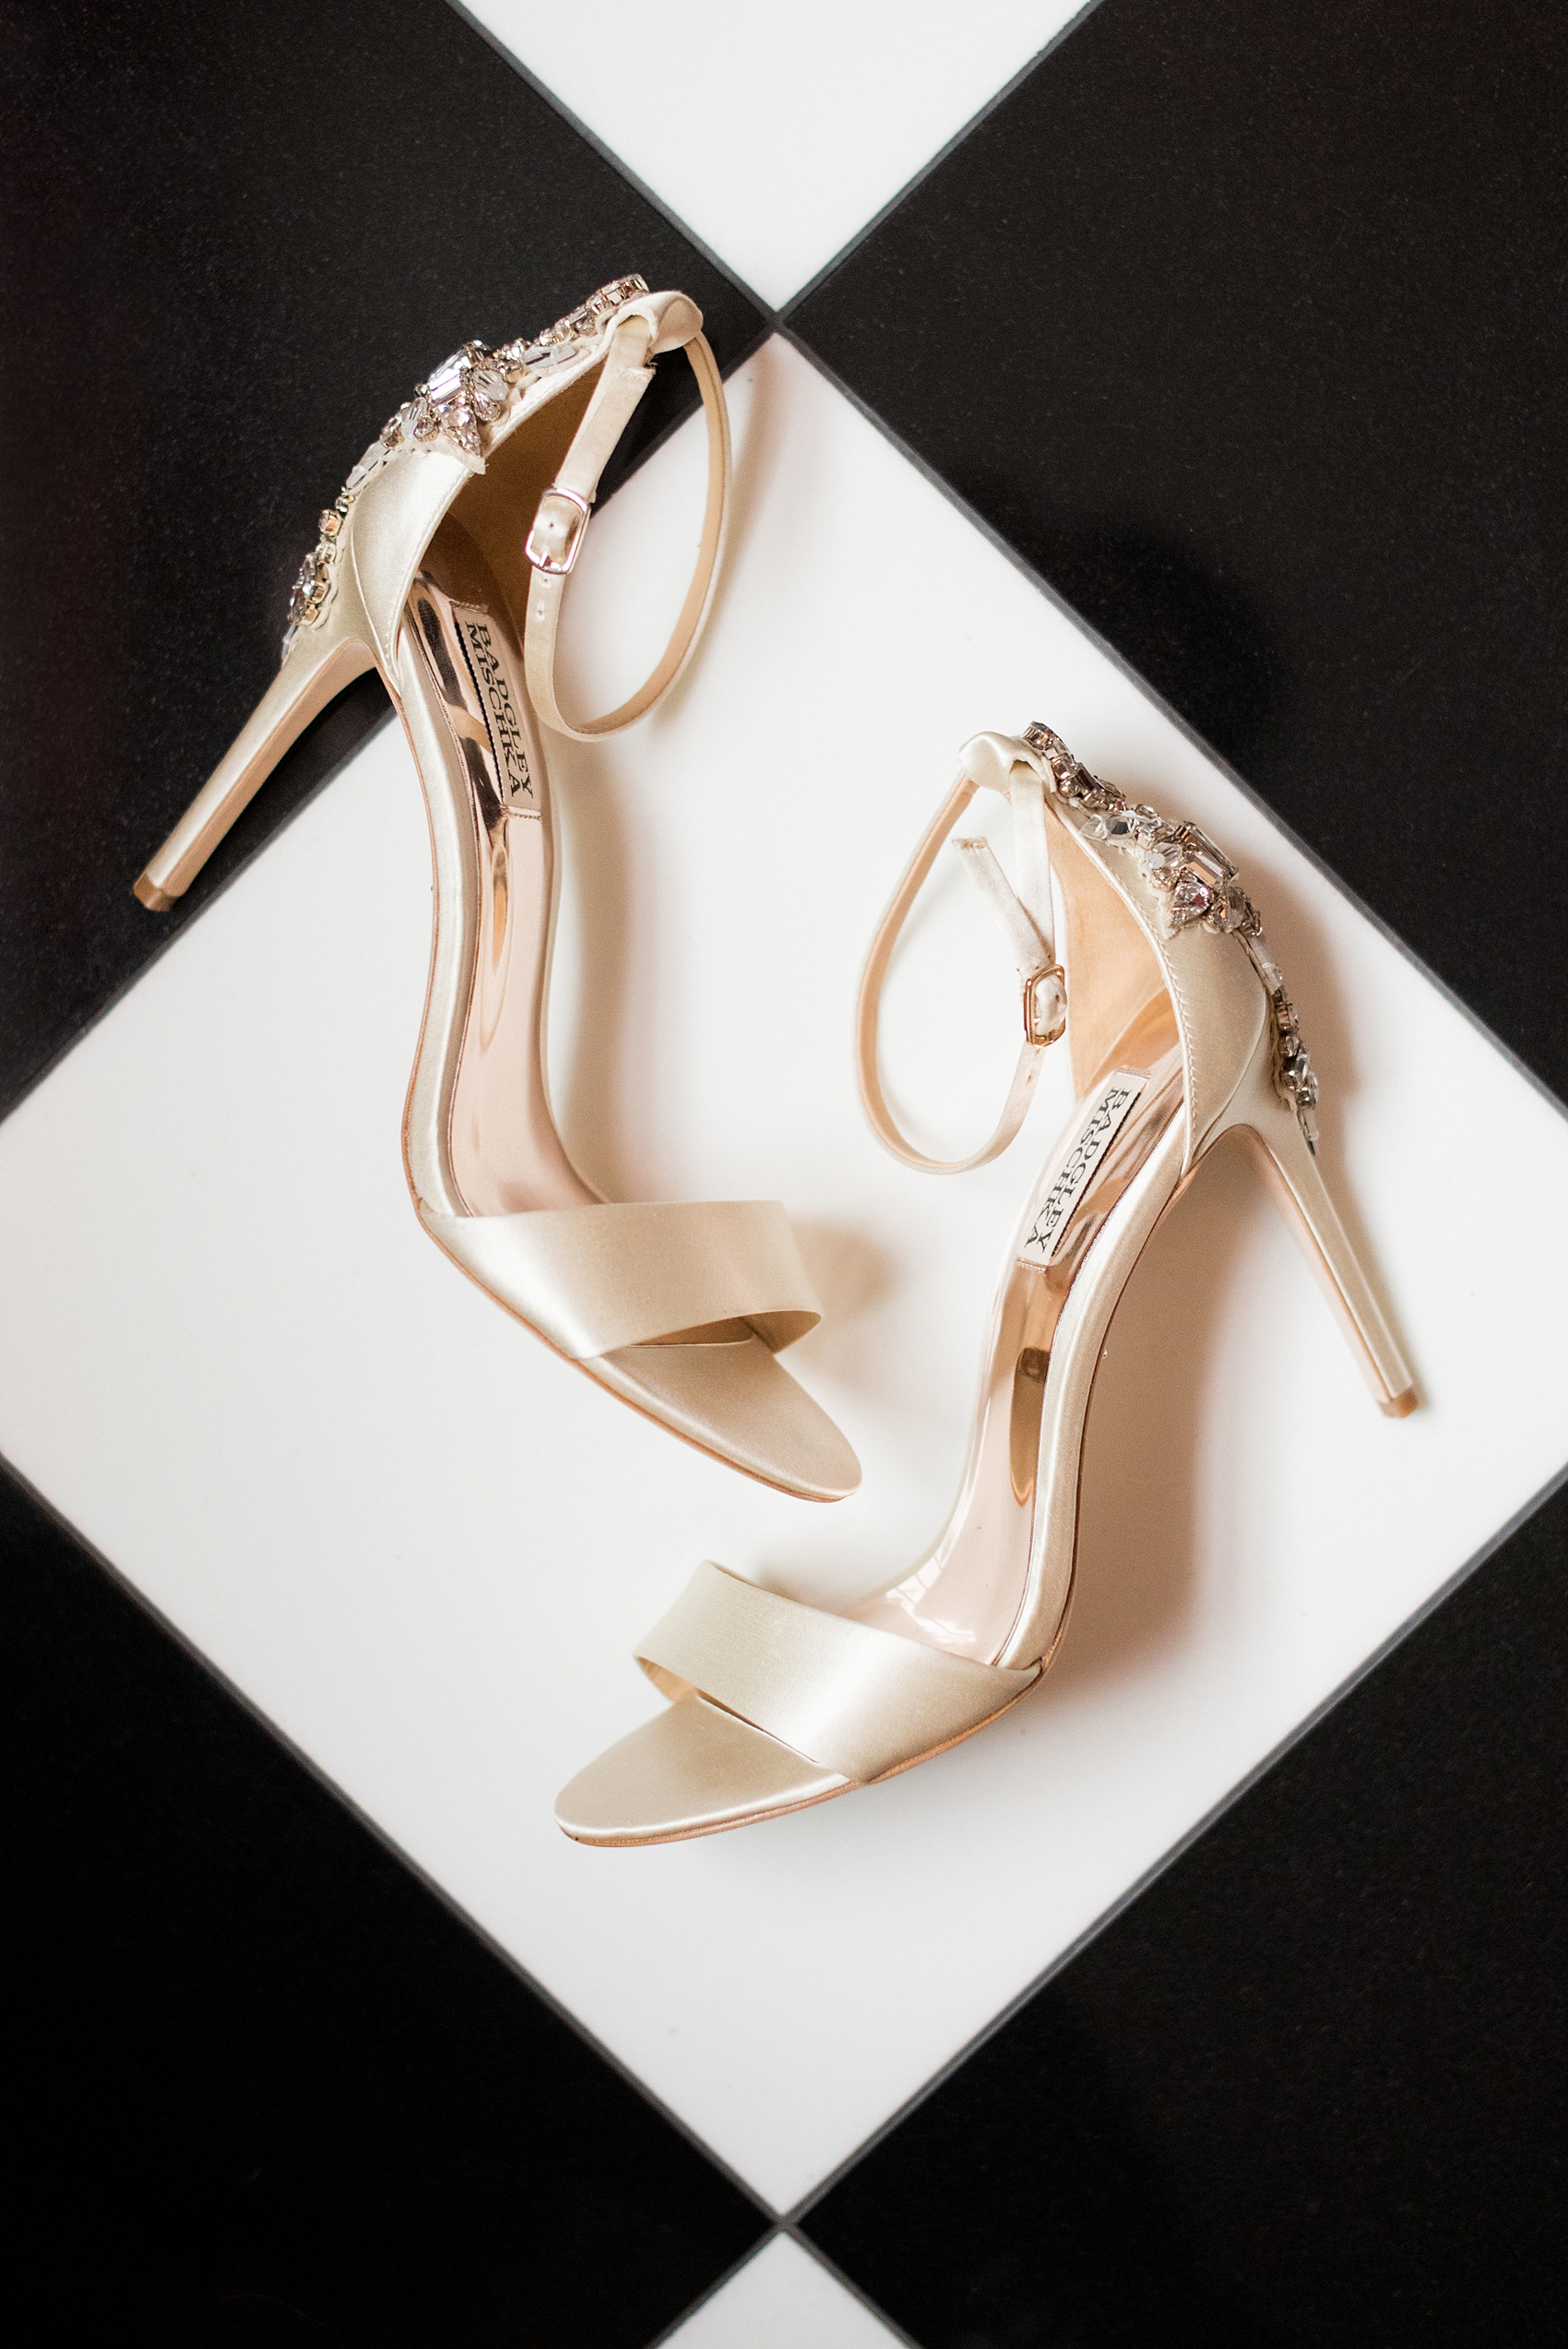 Beautiful wedding photos at The Carolina Inn at Chapel Hill, North Carolina by Mikkel Paige Photography. Detail photo of the bride's sparkly wedding shoe heels.